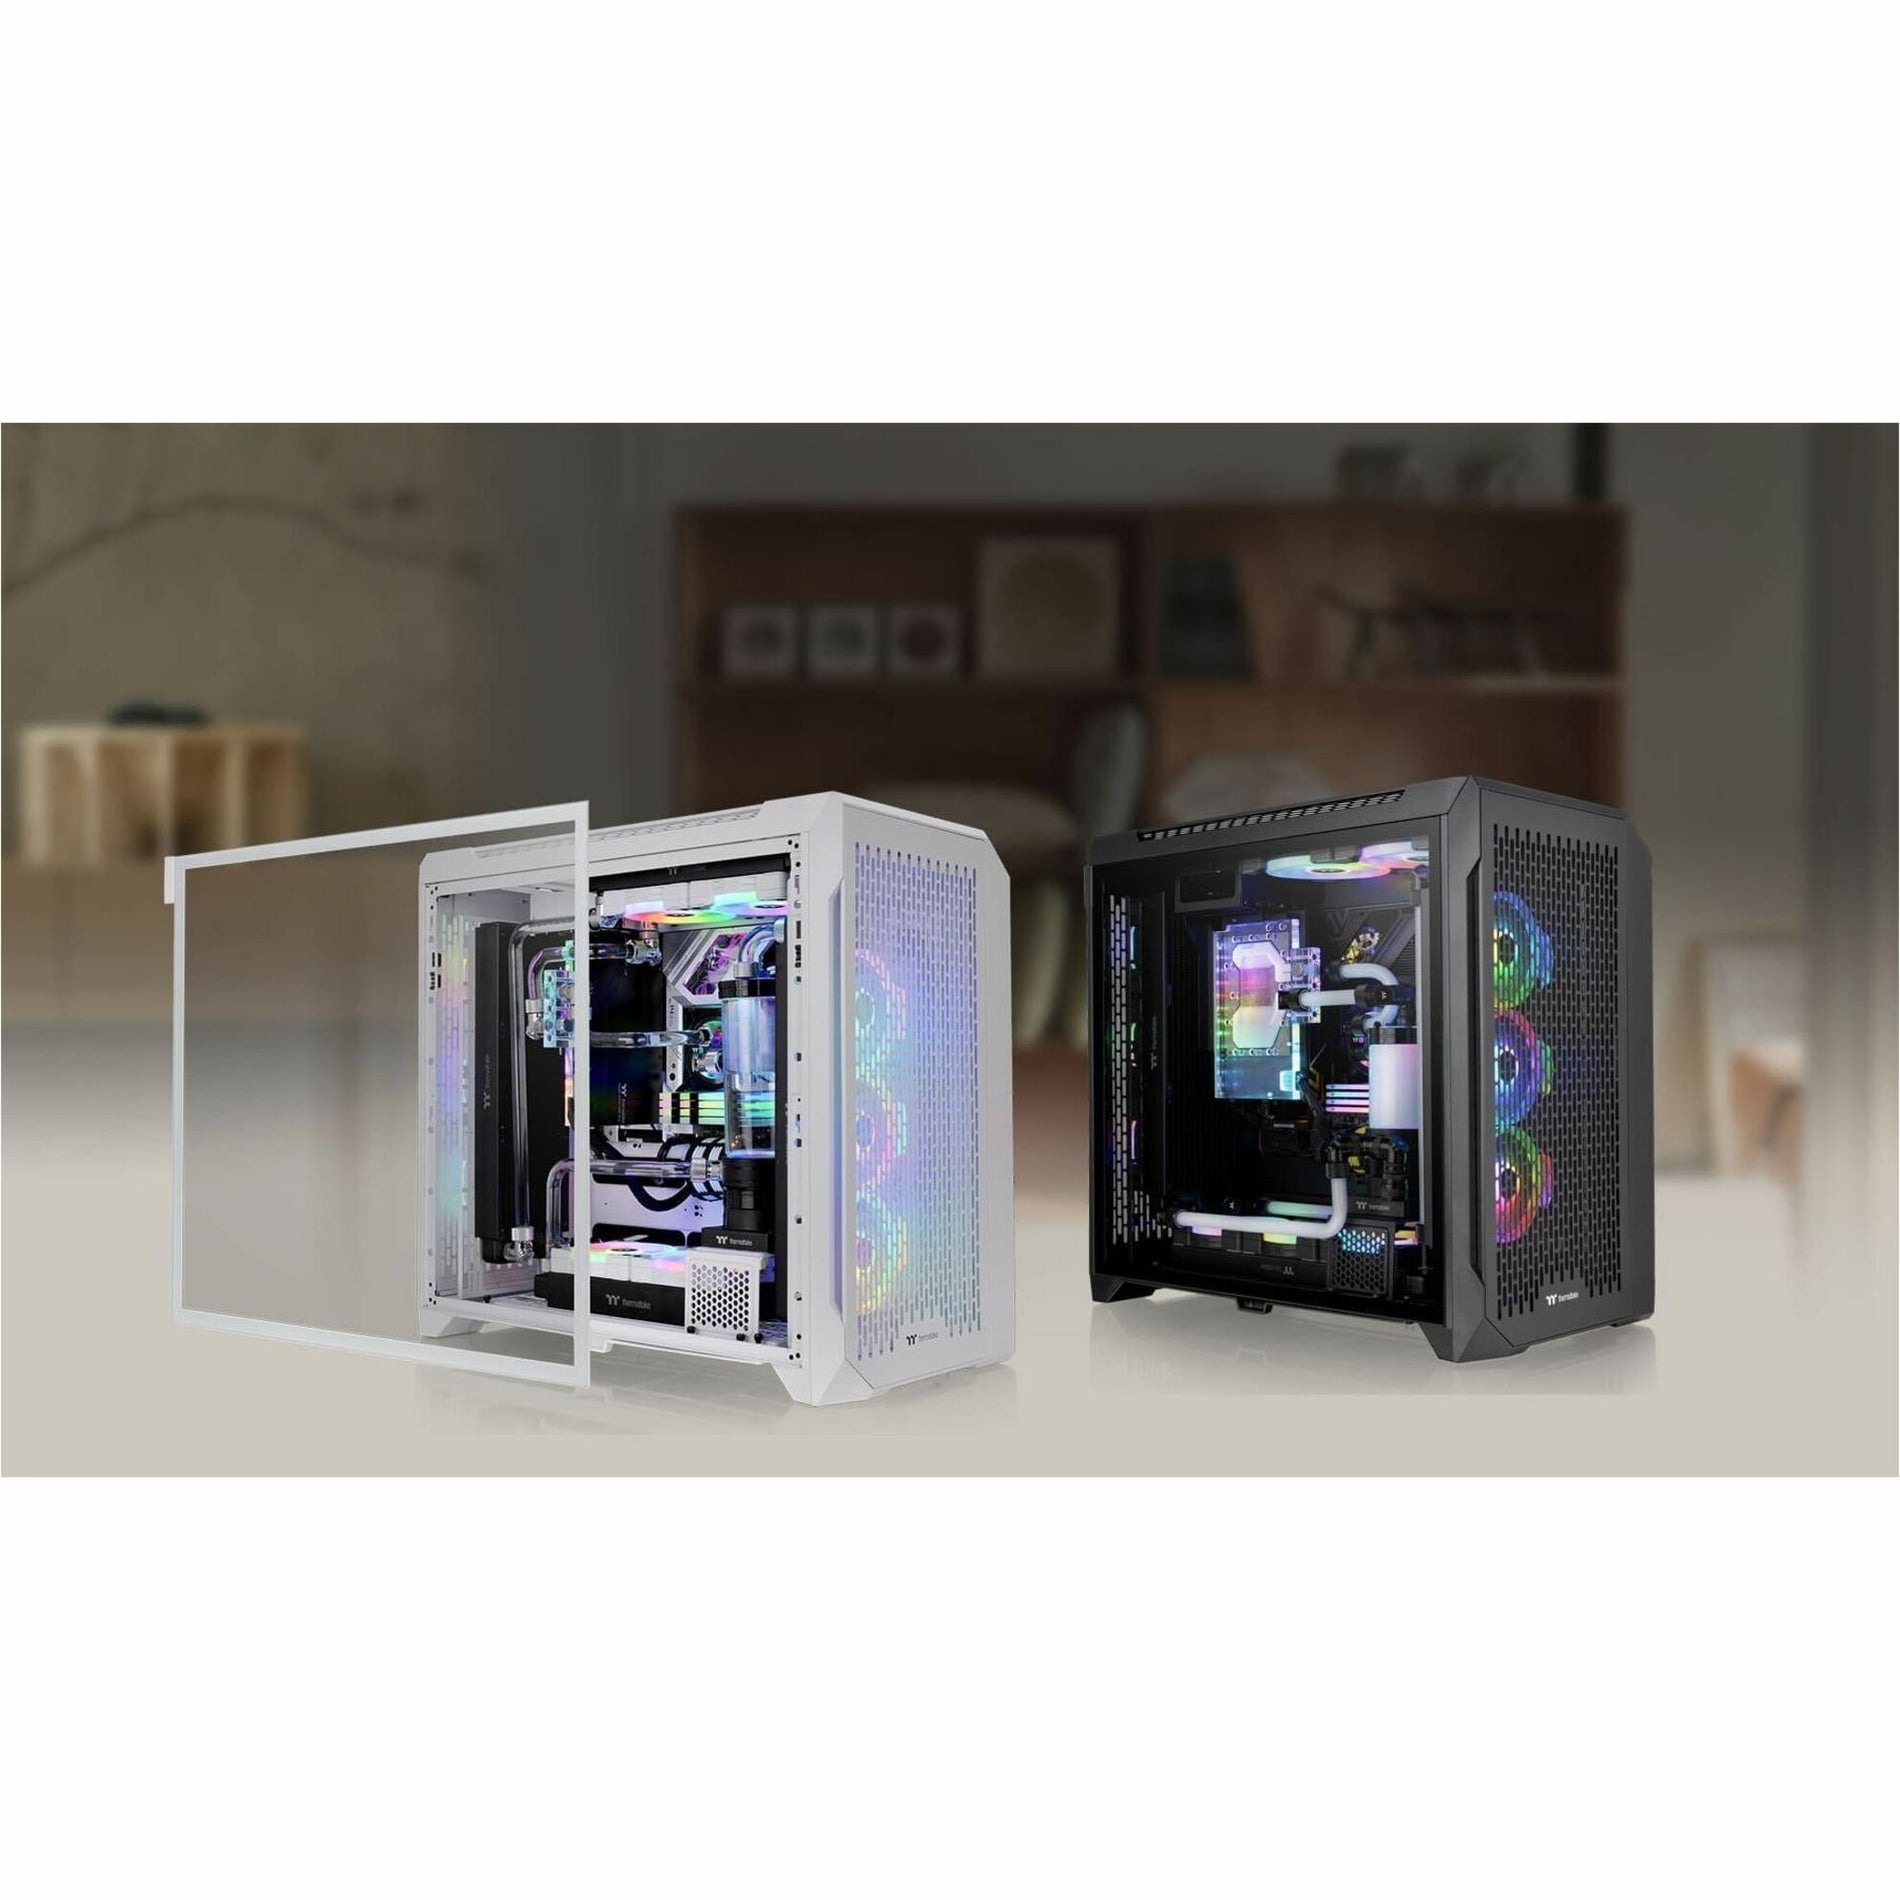 Thermaltake CA-1X6-00F6WN-00 CTE C750 Air Snow Full Tower Chassis, Gaming Computer Case, White, 1200W Power Supply